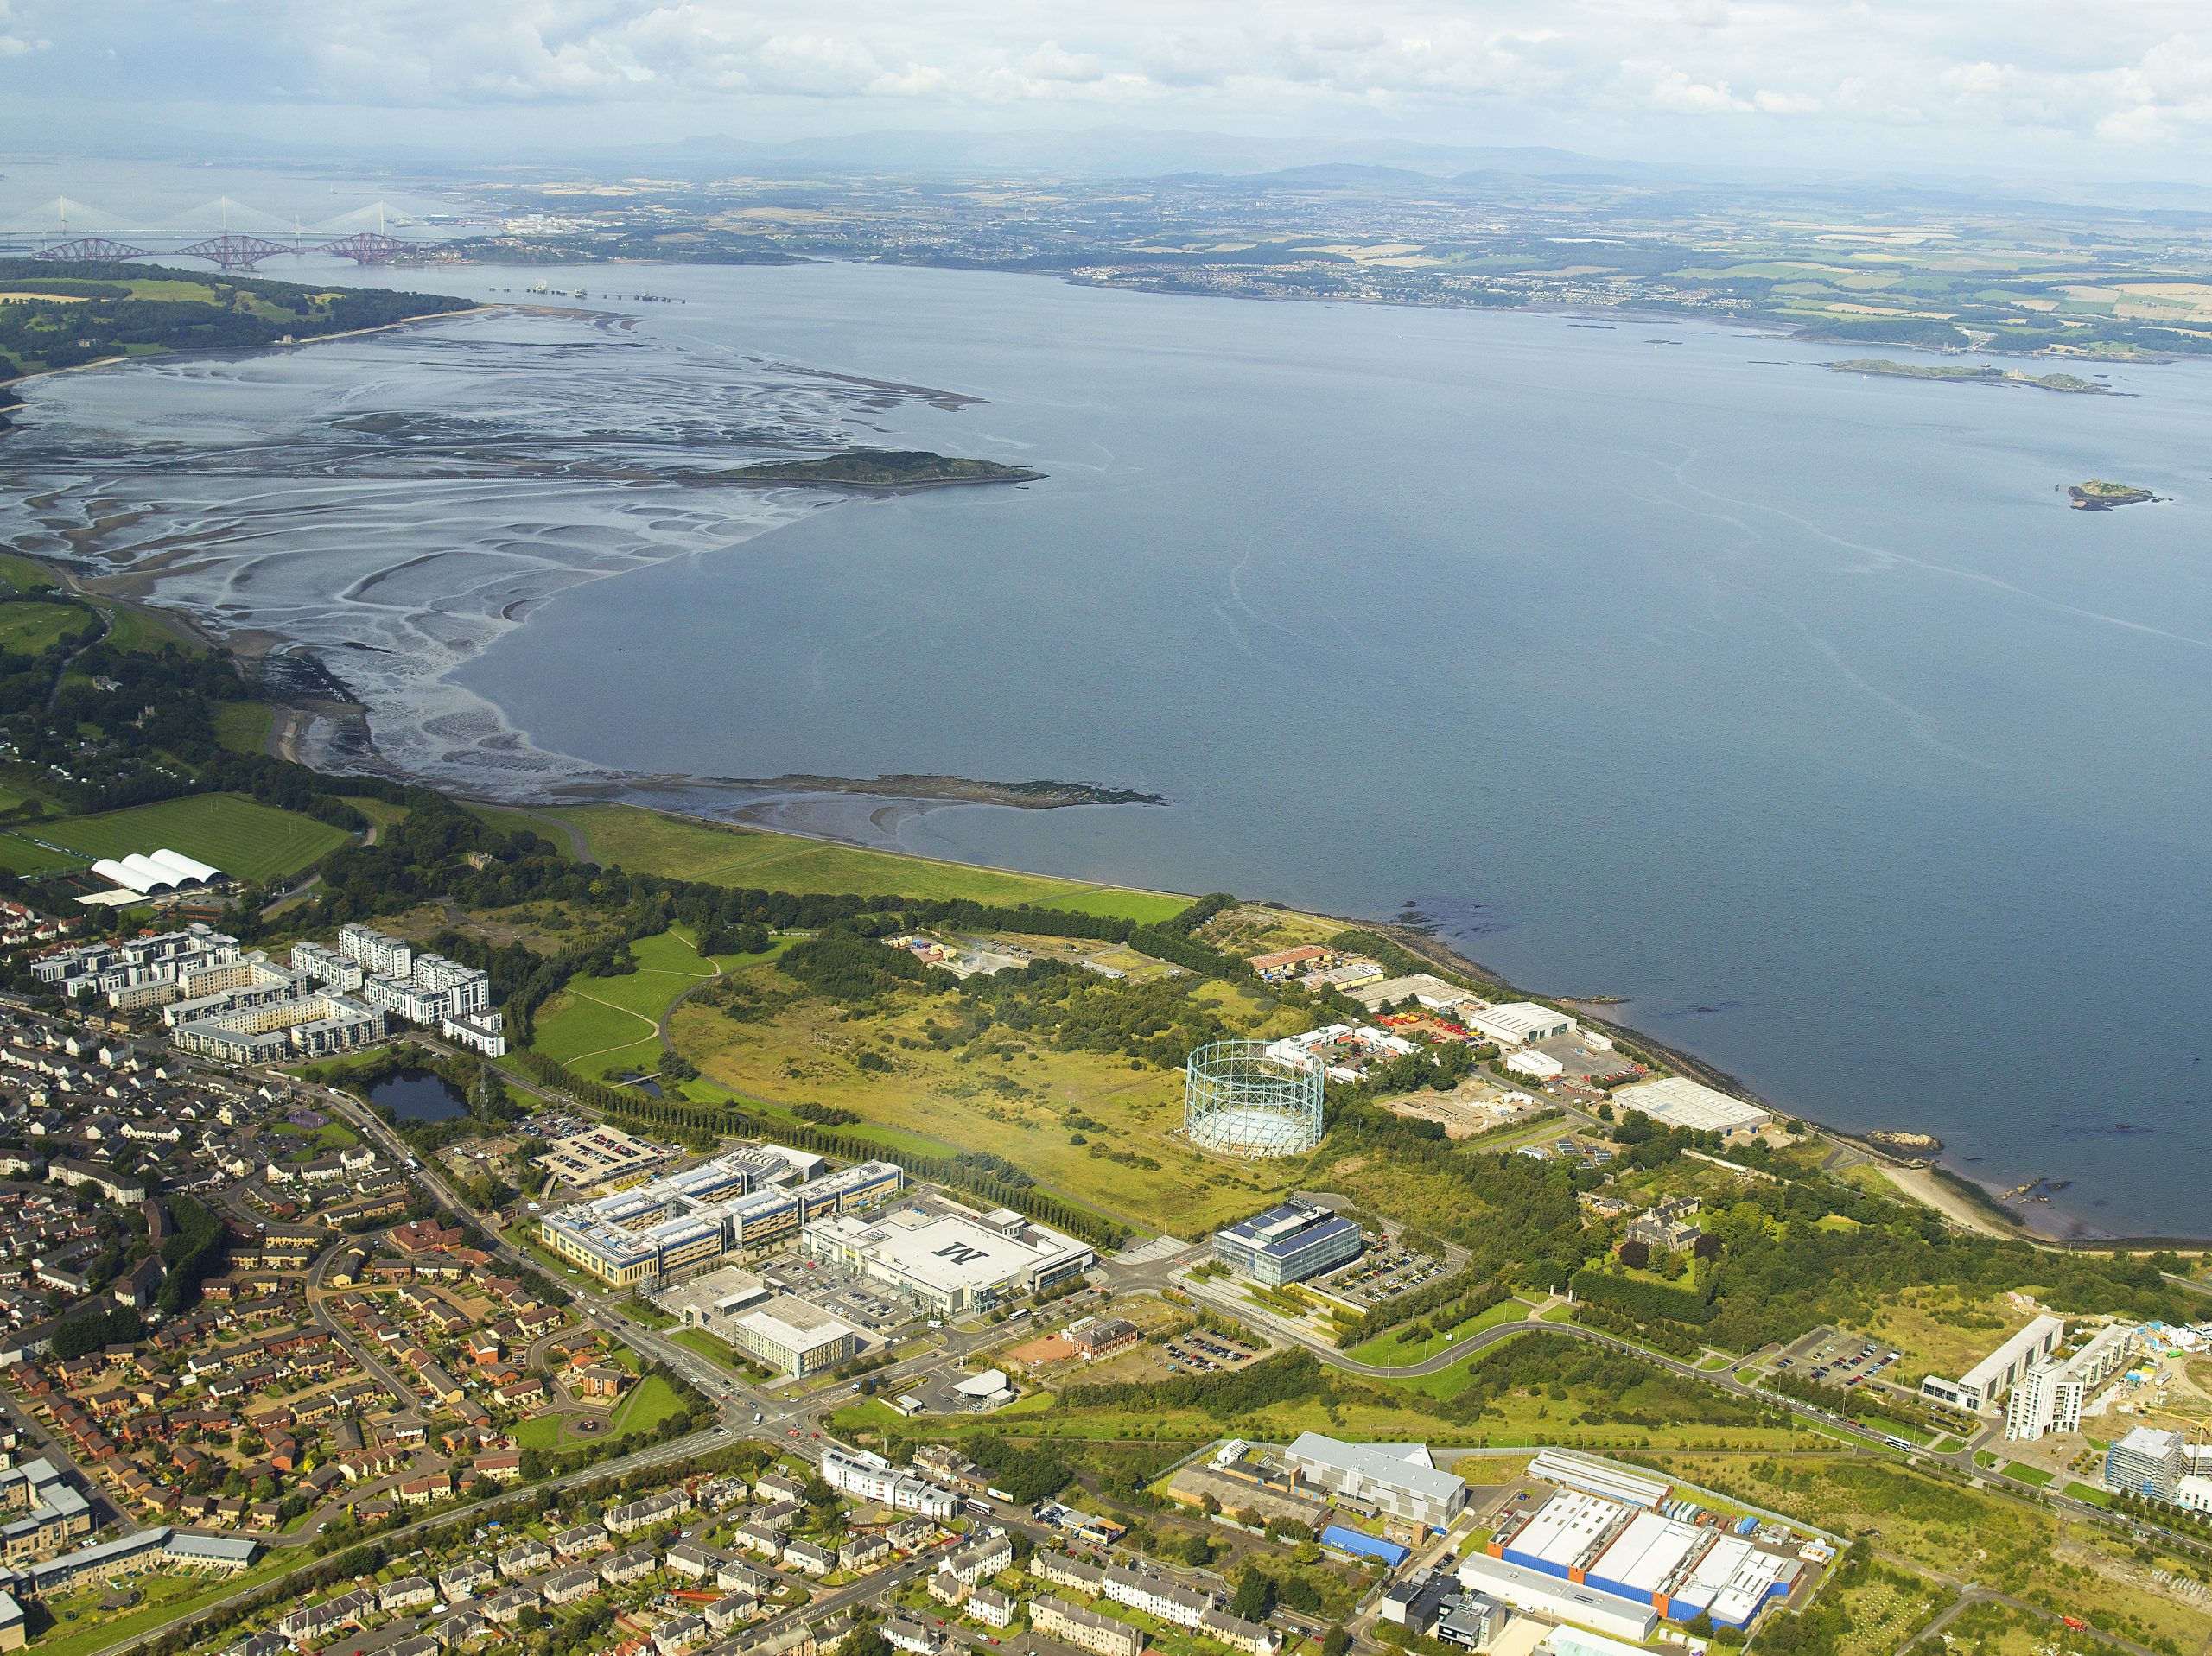 Arial view of the Granton waterfront